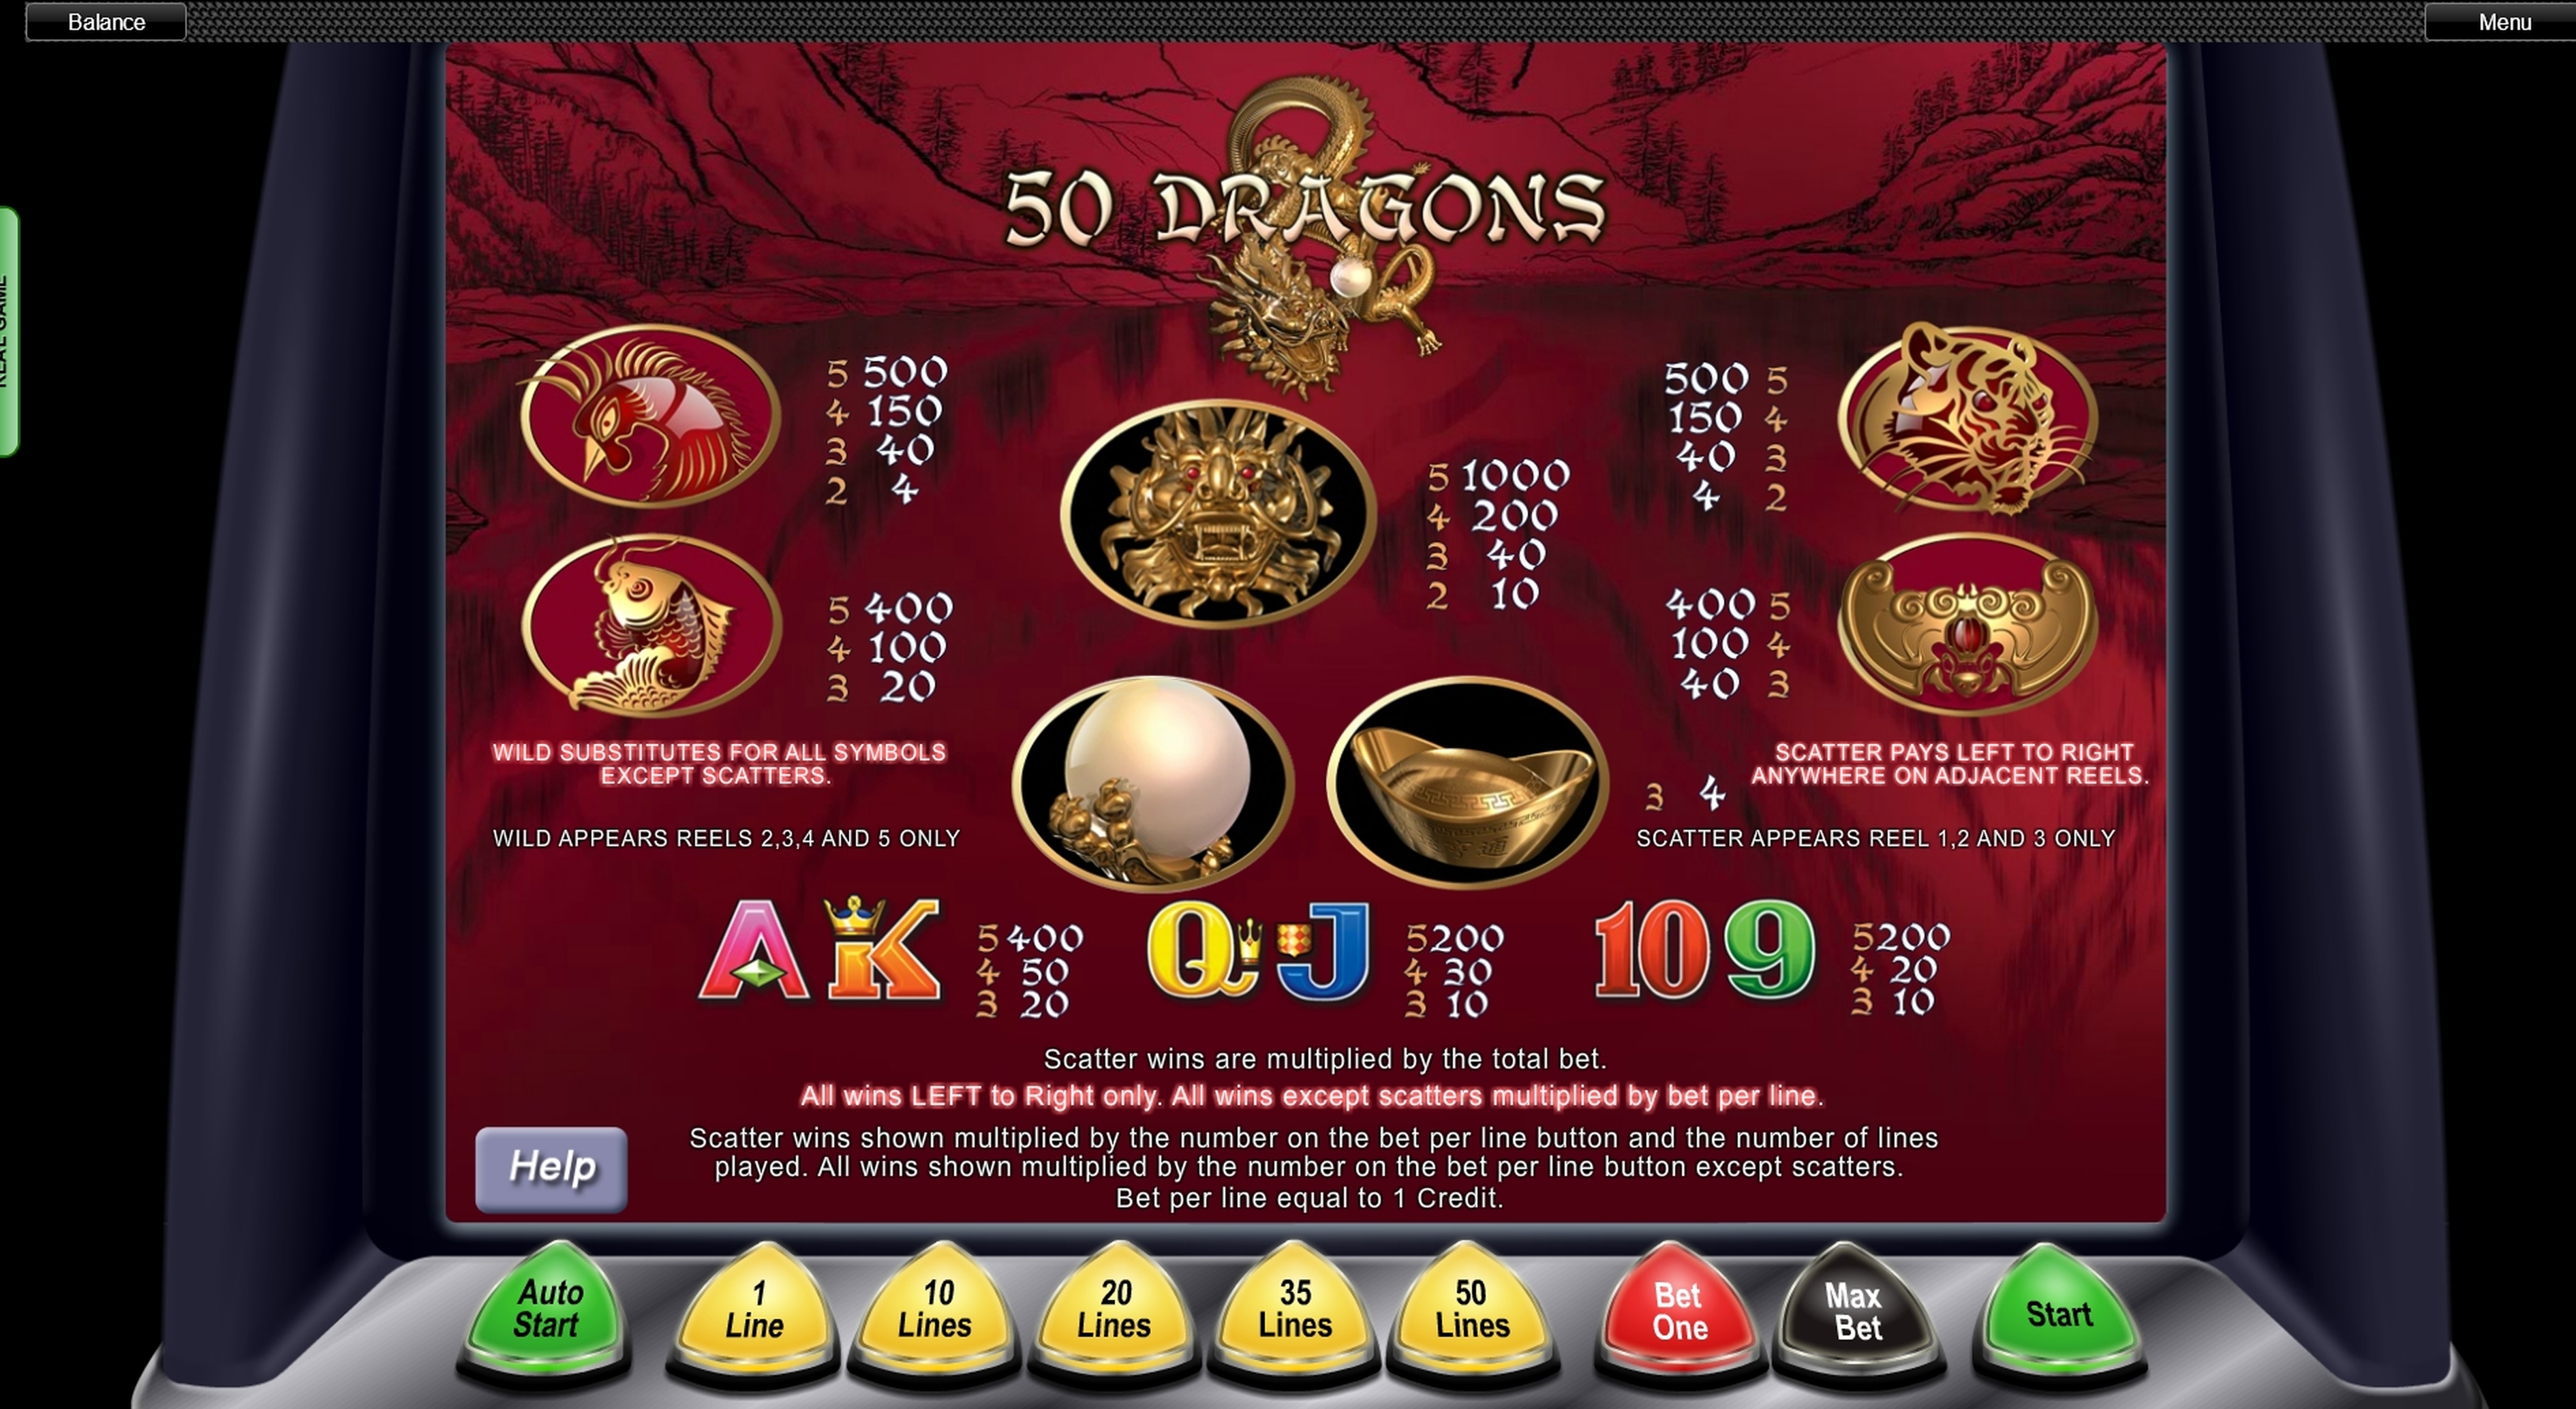 Info of 50 Dragons Slot Game by Aristocrat